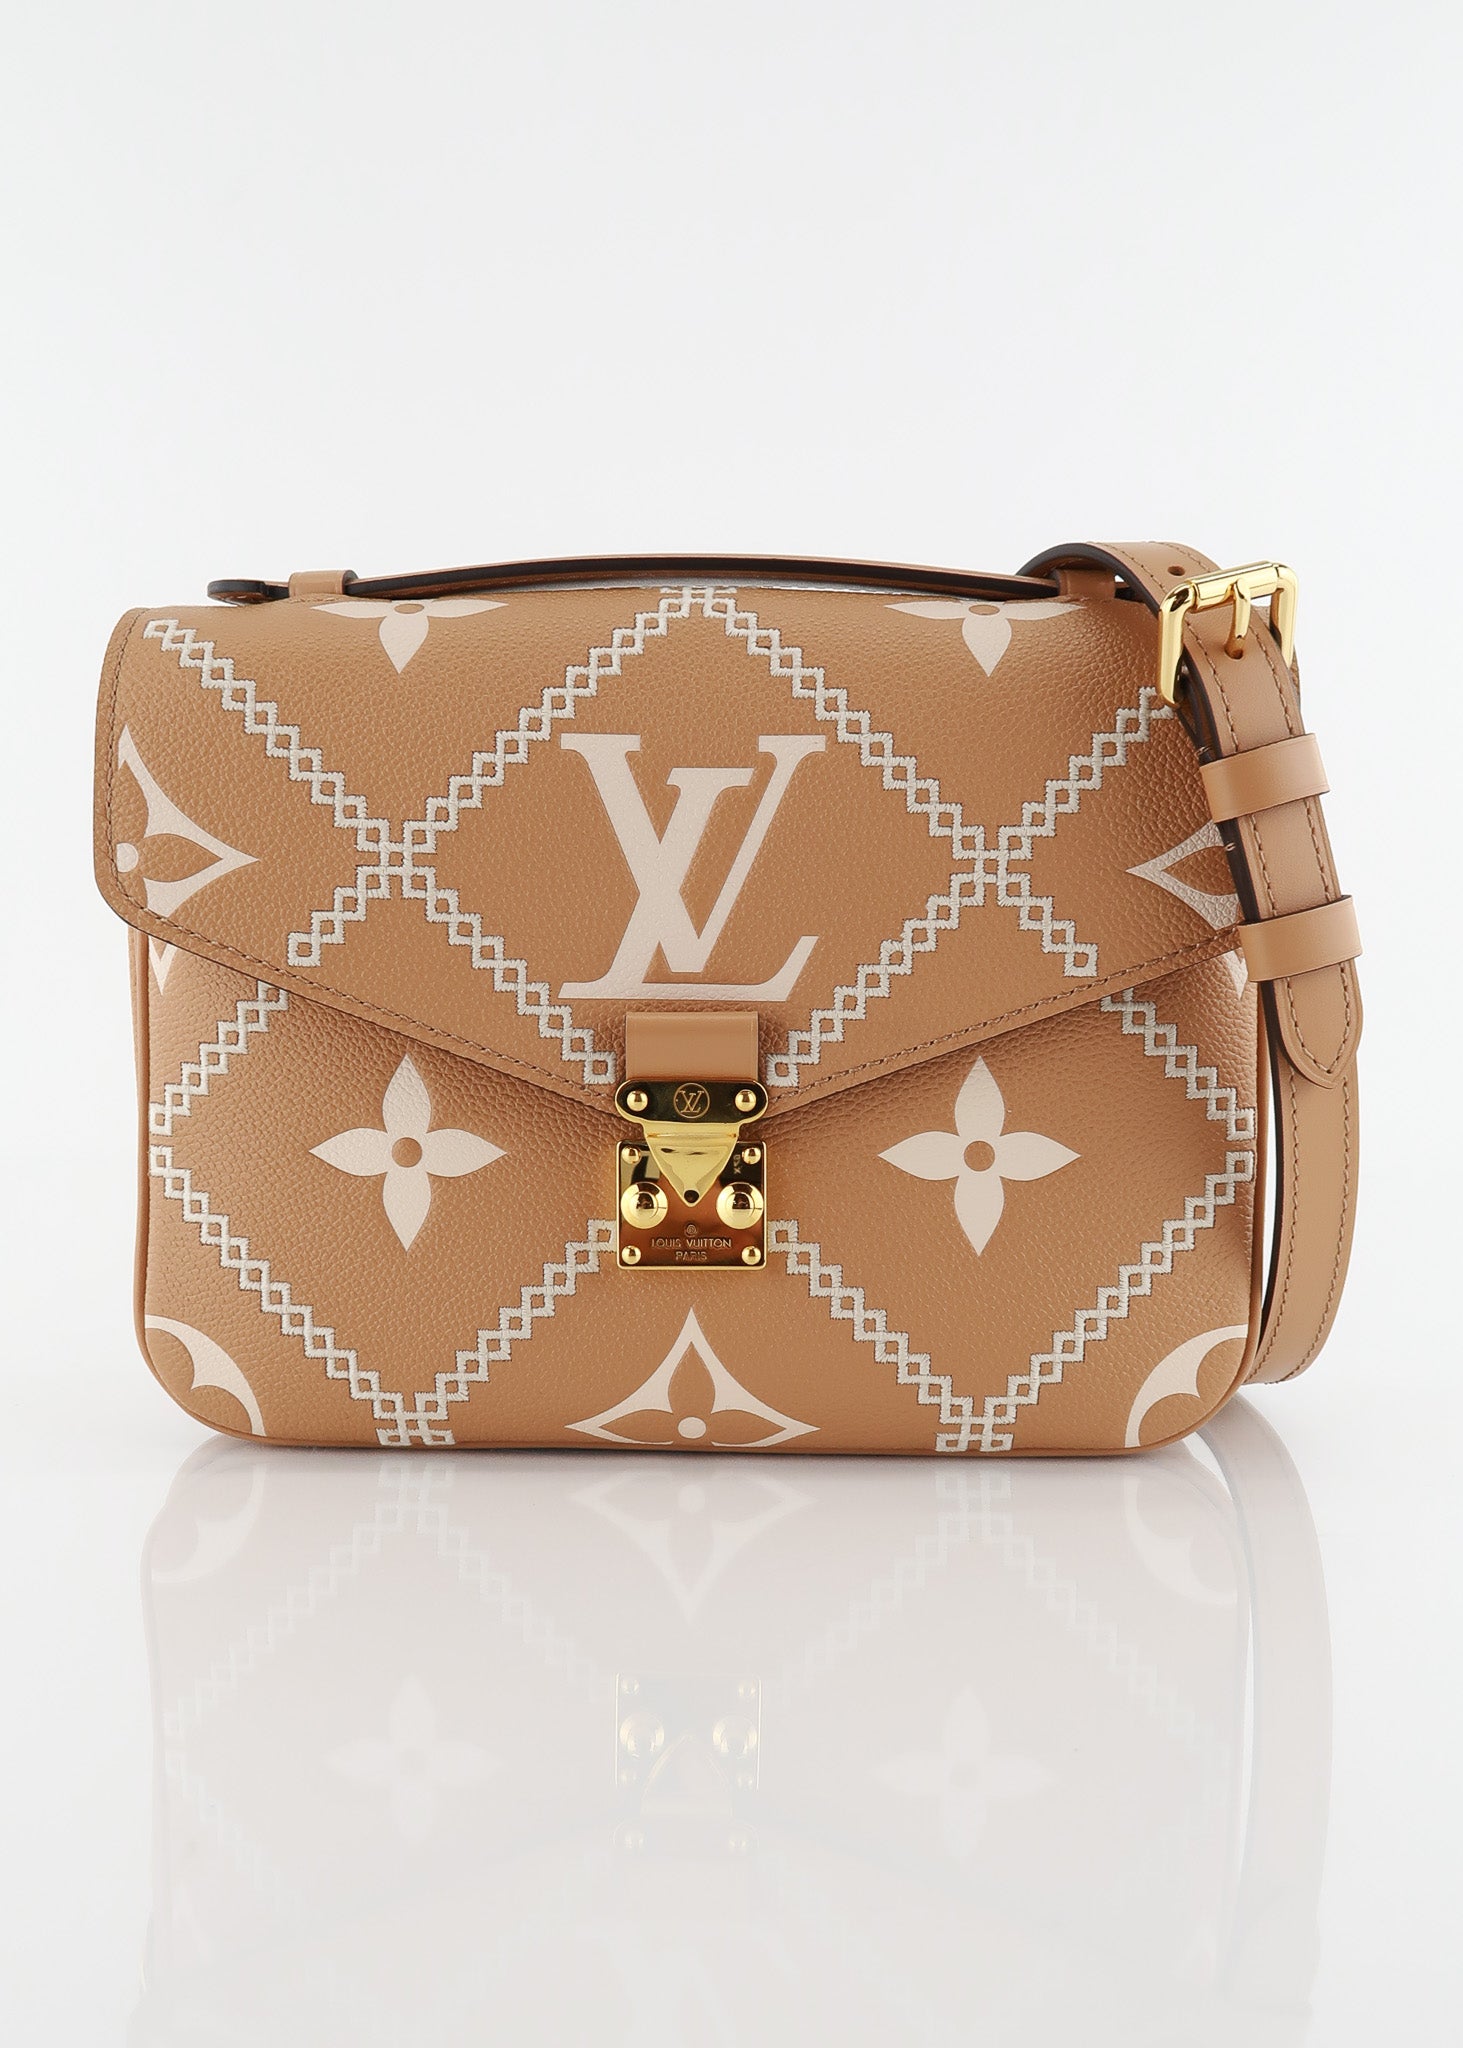 I finally got the Bicolor Pochette Felicie direct from LV, without